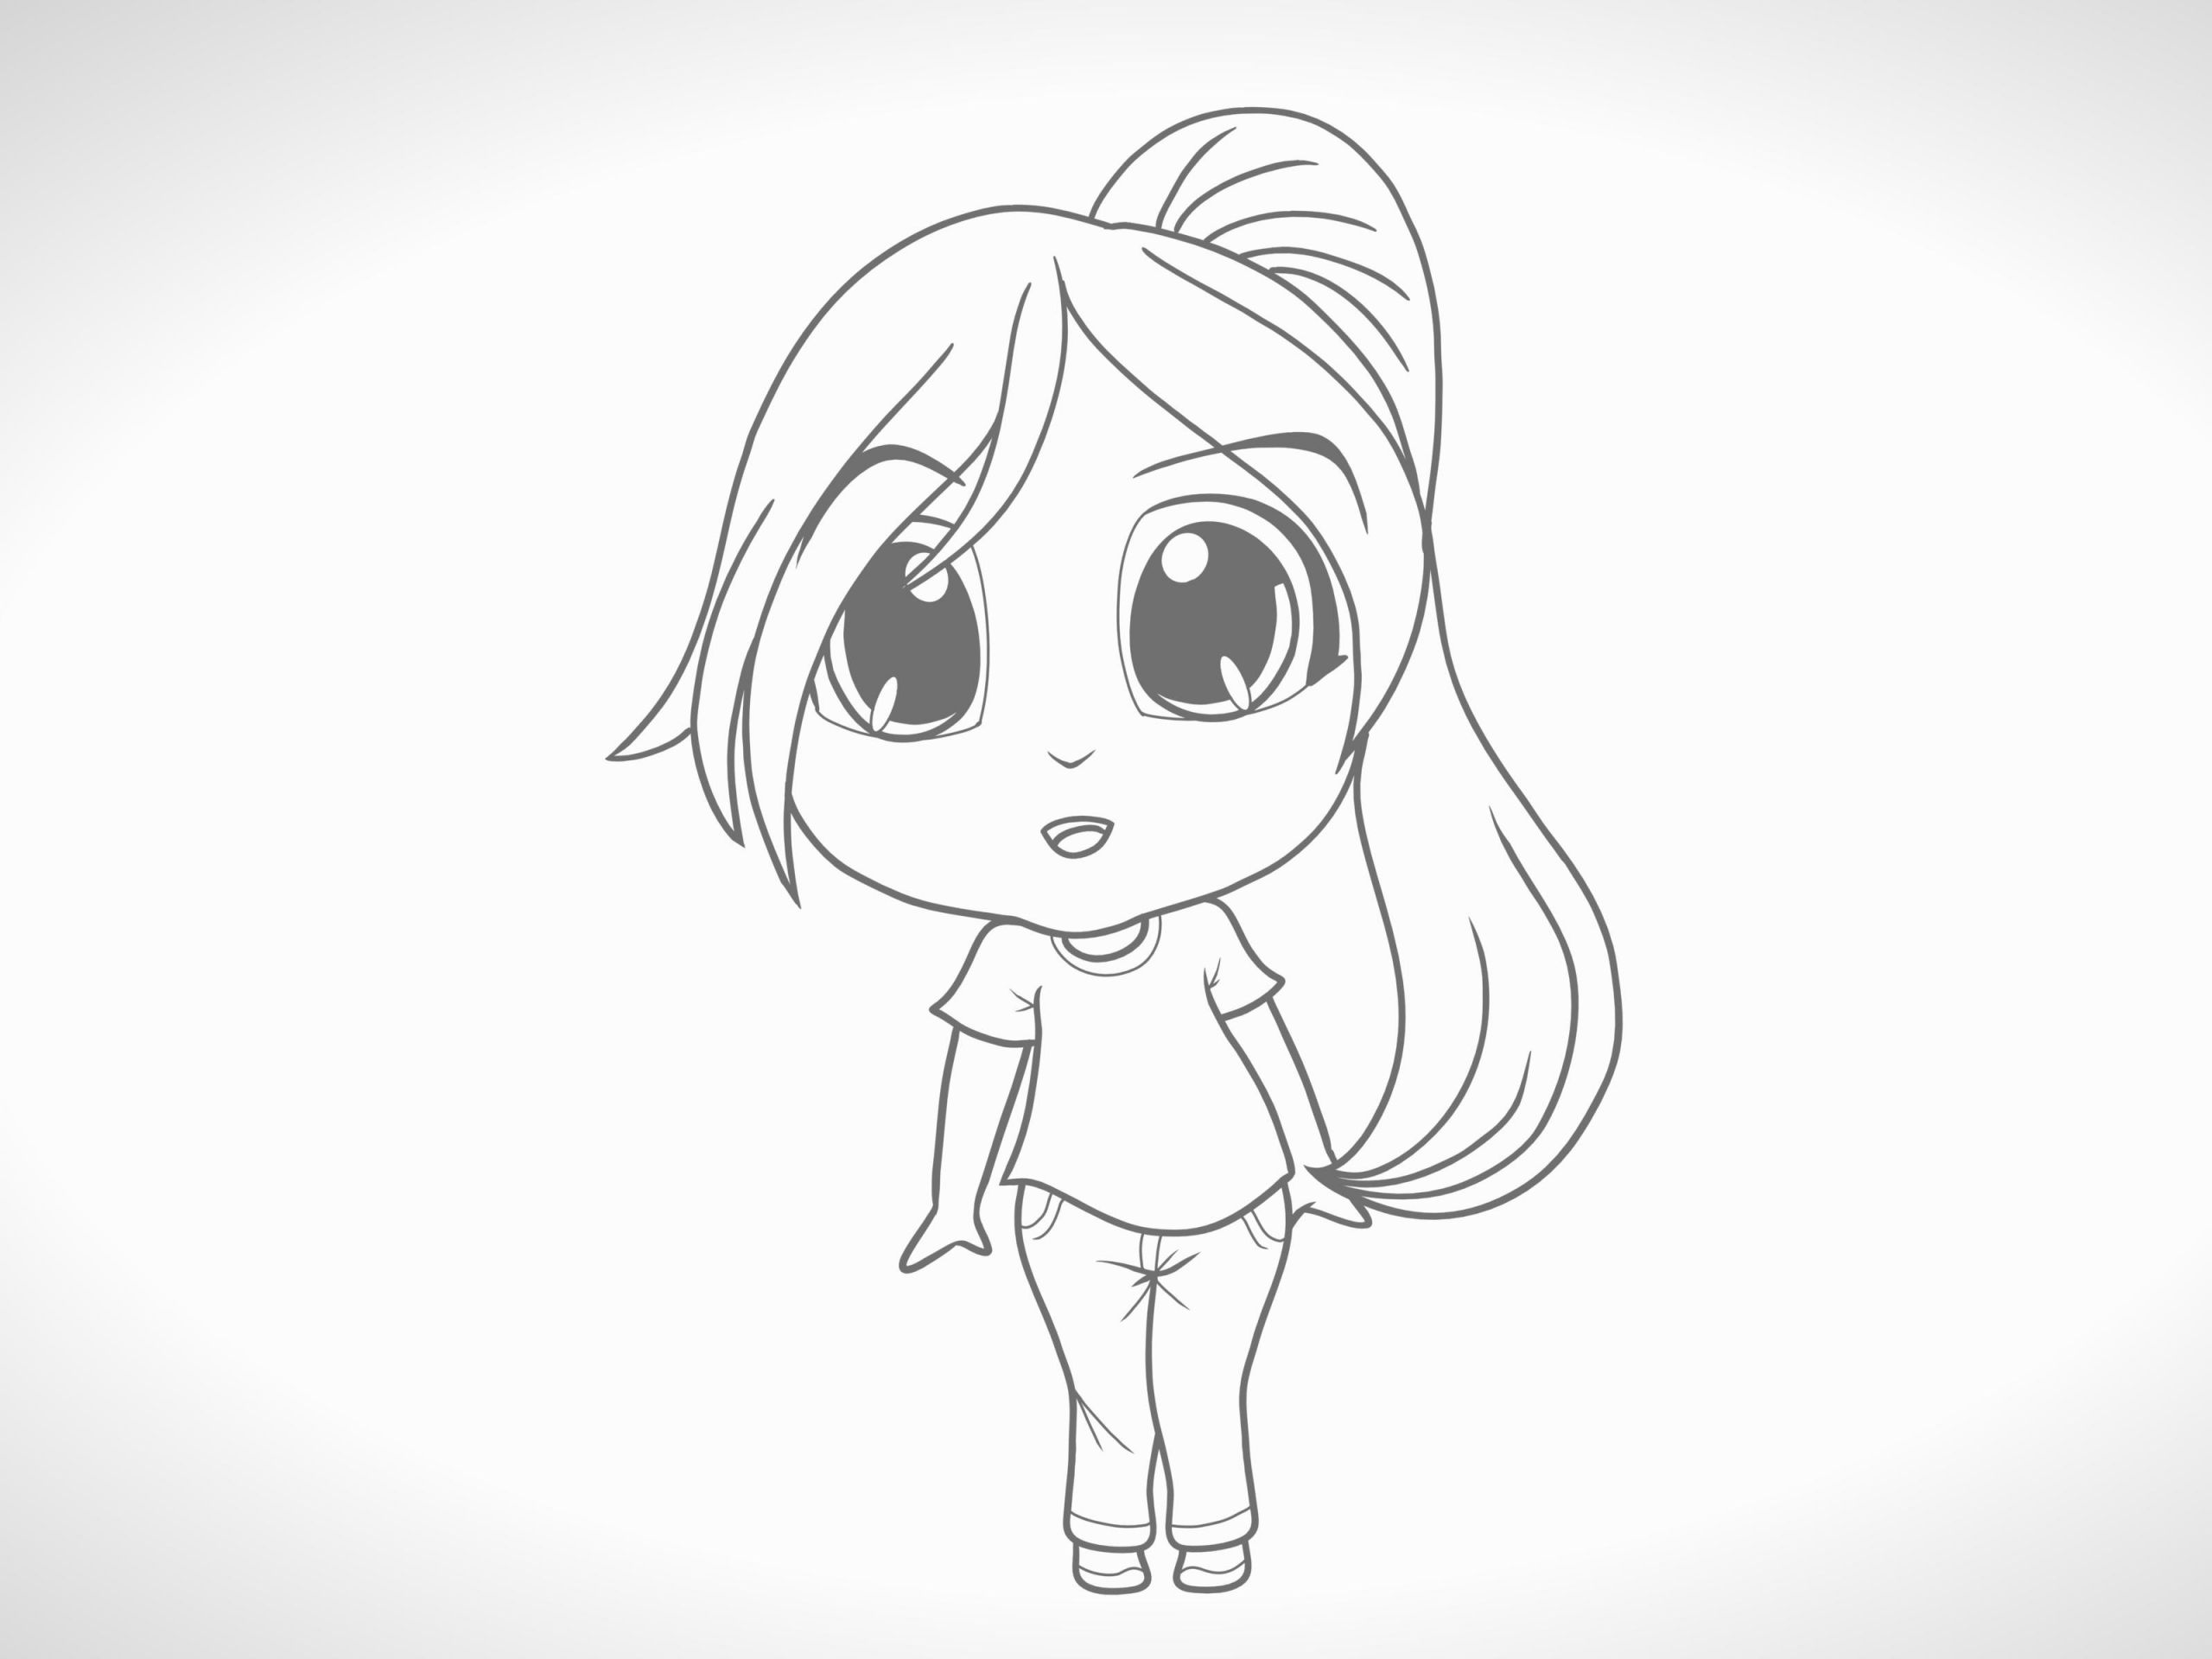 How to Draw An Anime Girl On Ibispaint How to Draw A Chibi Character 12 Steps with Pictures